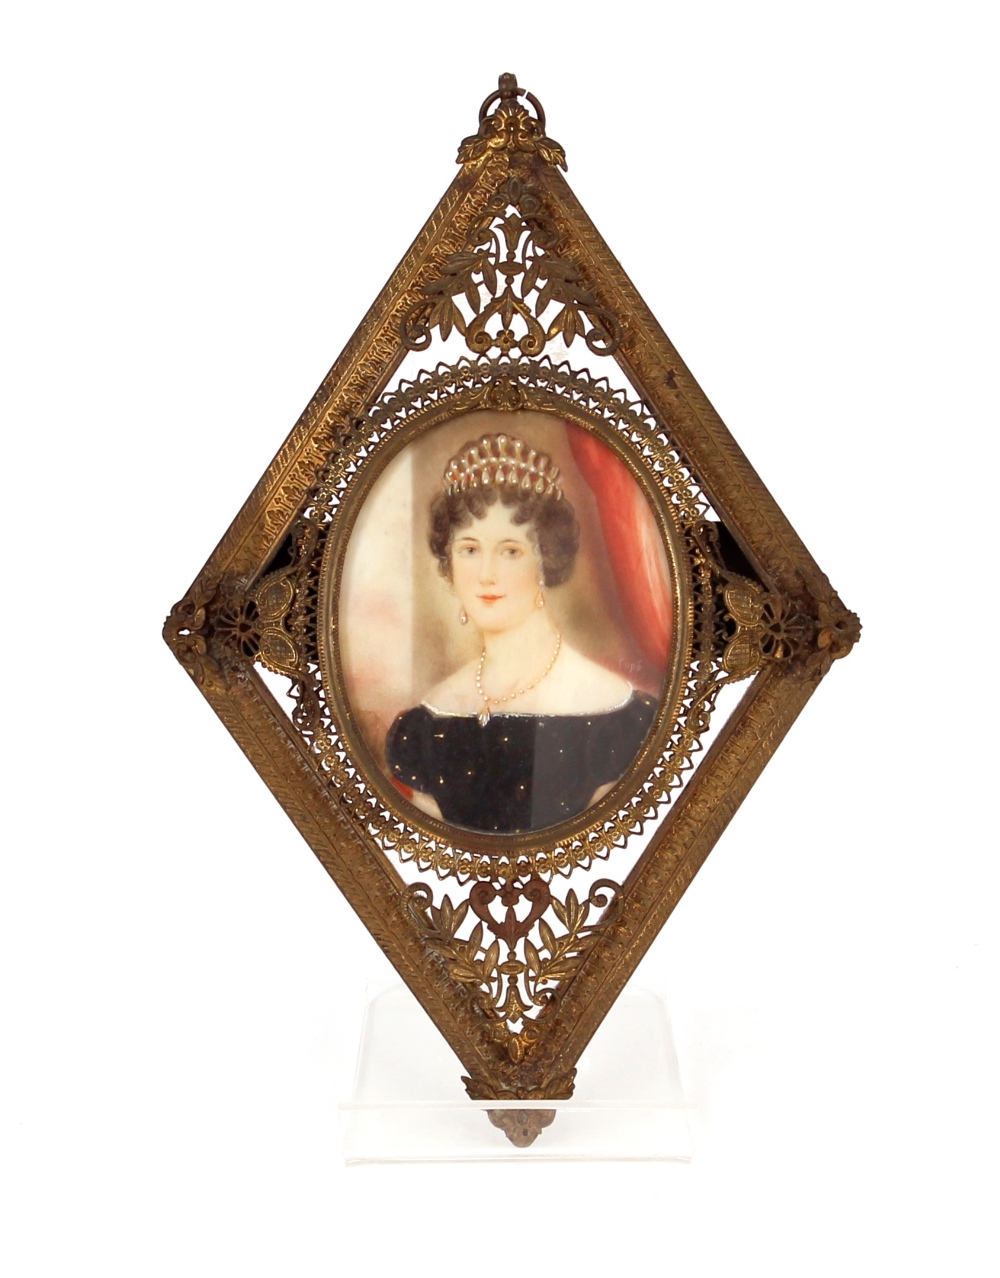 19th Century school, oval portrait study of a young woman wearing tiara in a gilded filigree work